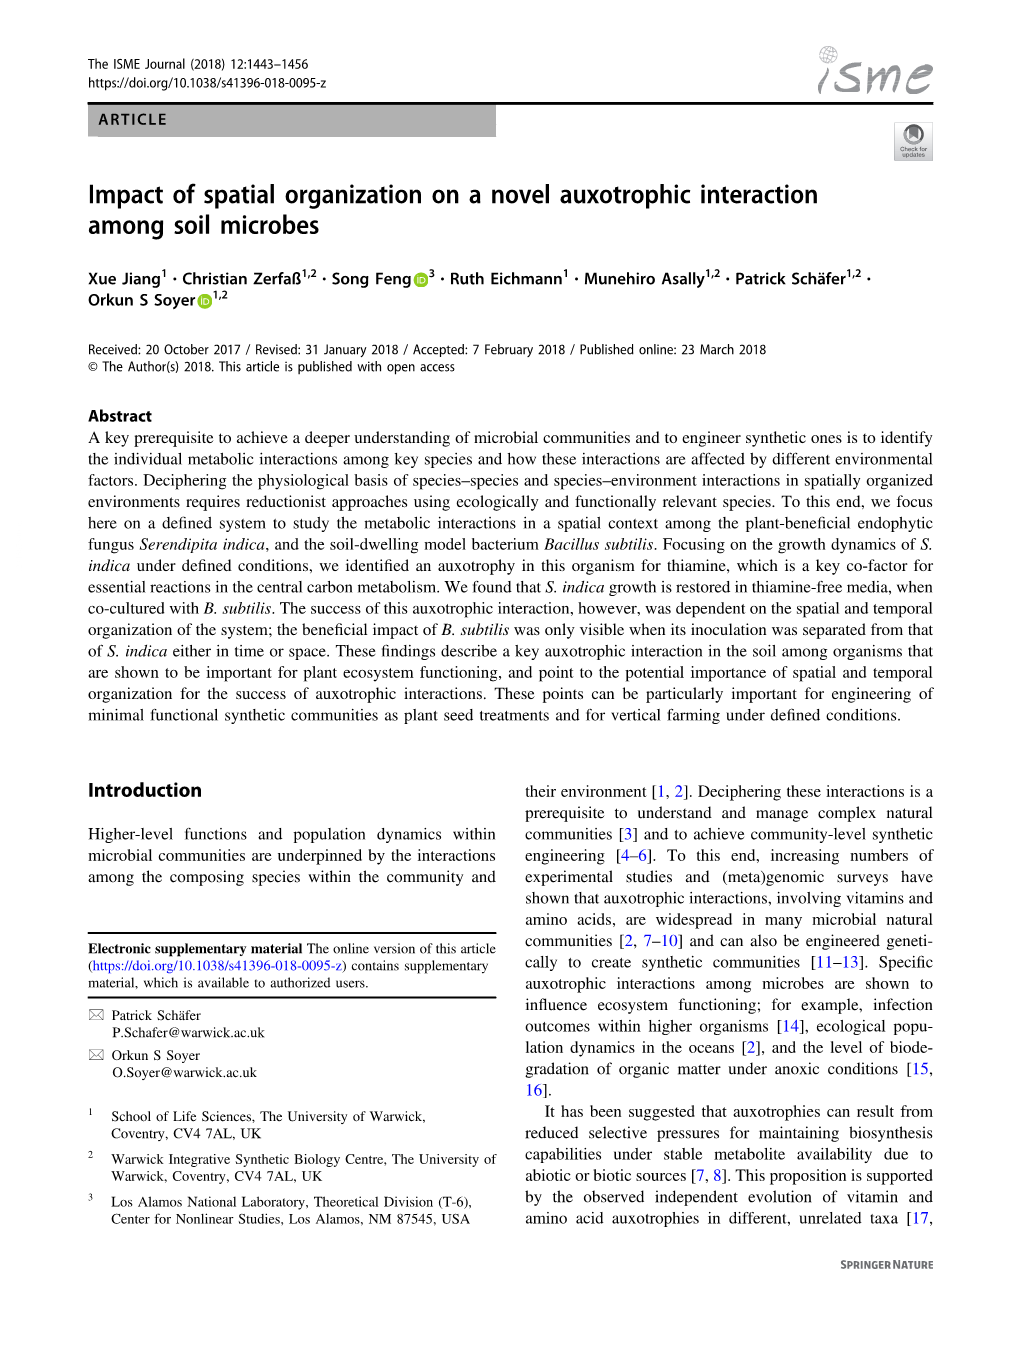 Impact of Spatial Organization on a Novel Auxotrophic Interaction Among Soil Microbes